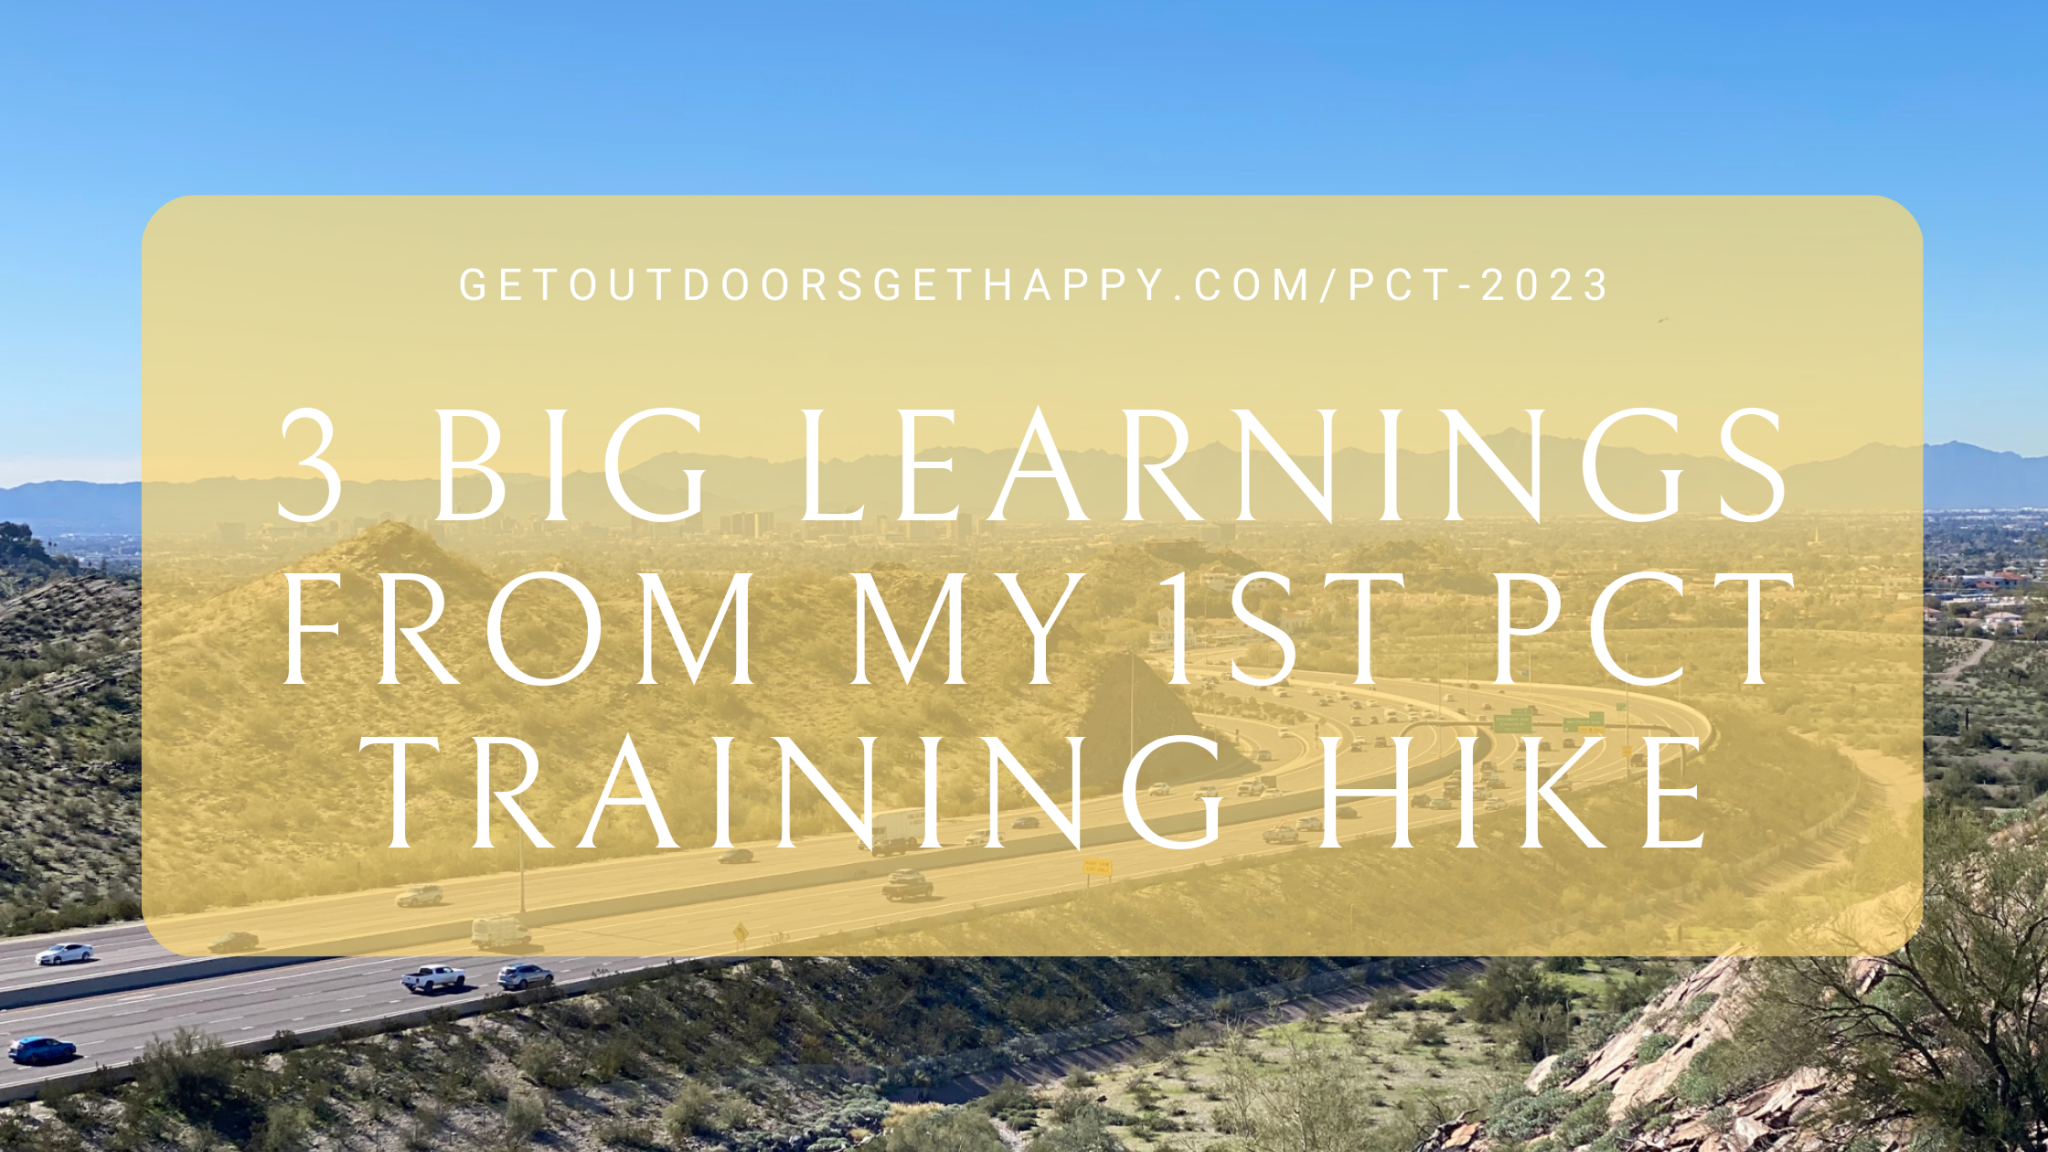 3 big learnings from my 1st PCT training hike